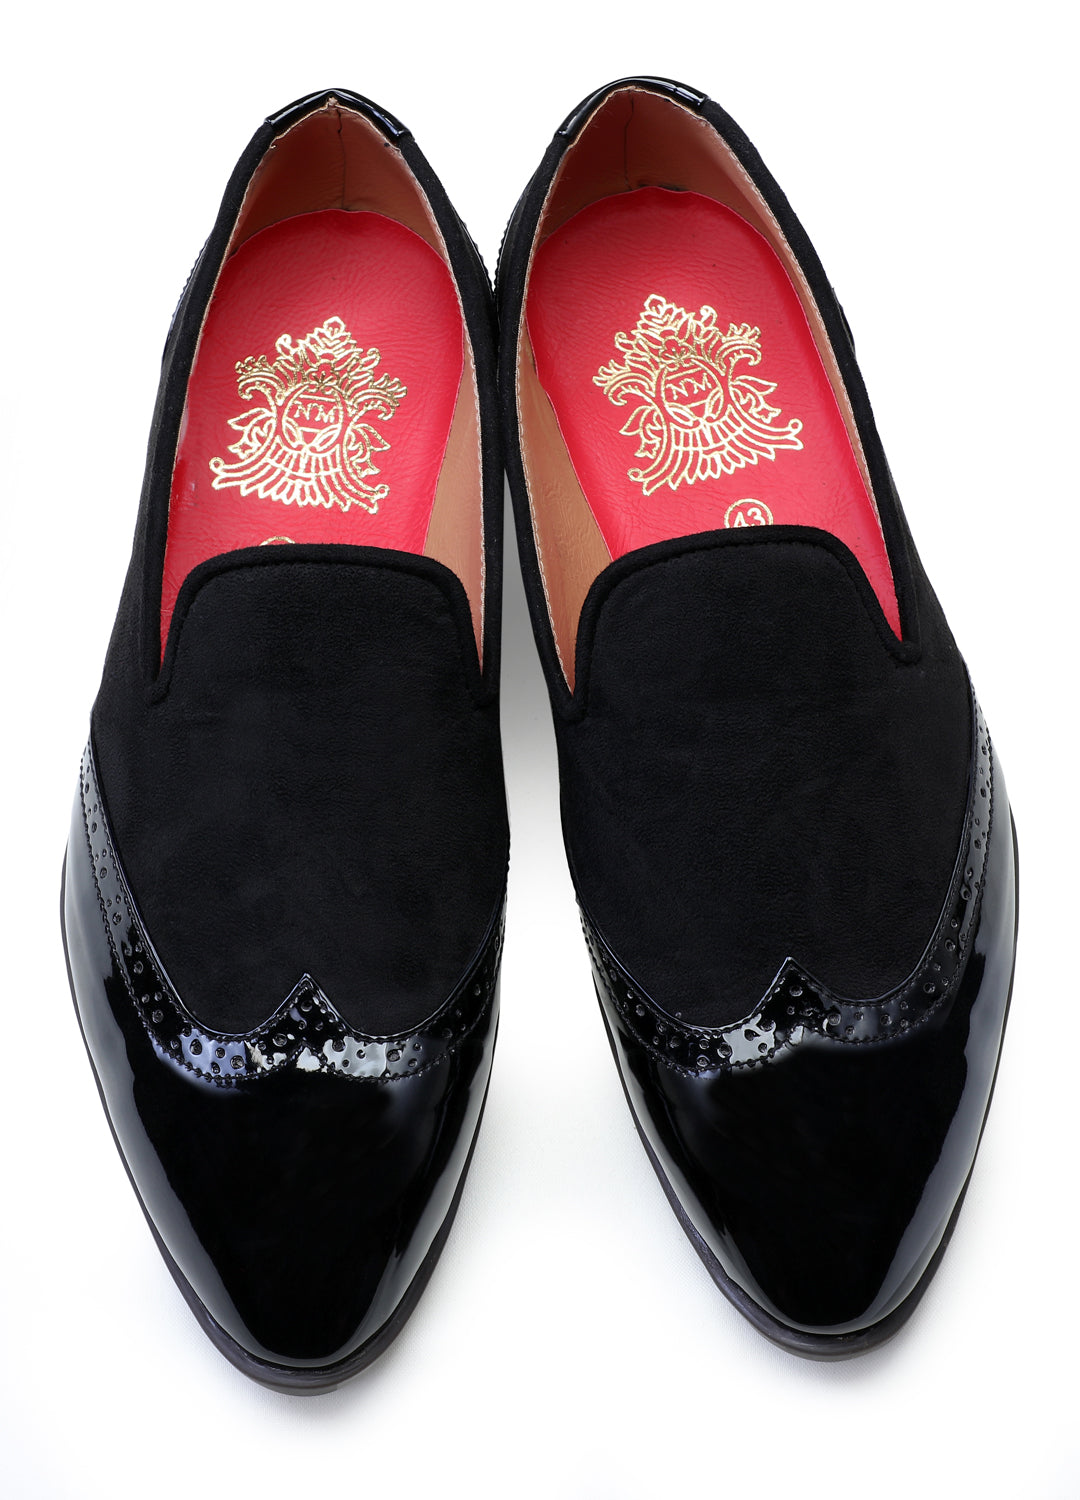 Black Handcrafted Semi-Leather Shoes